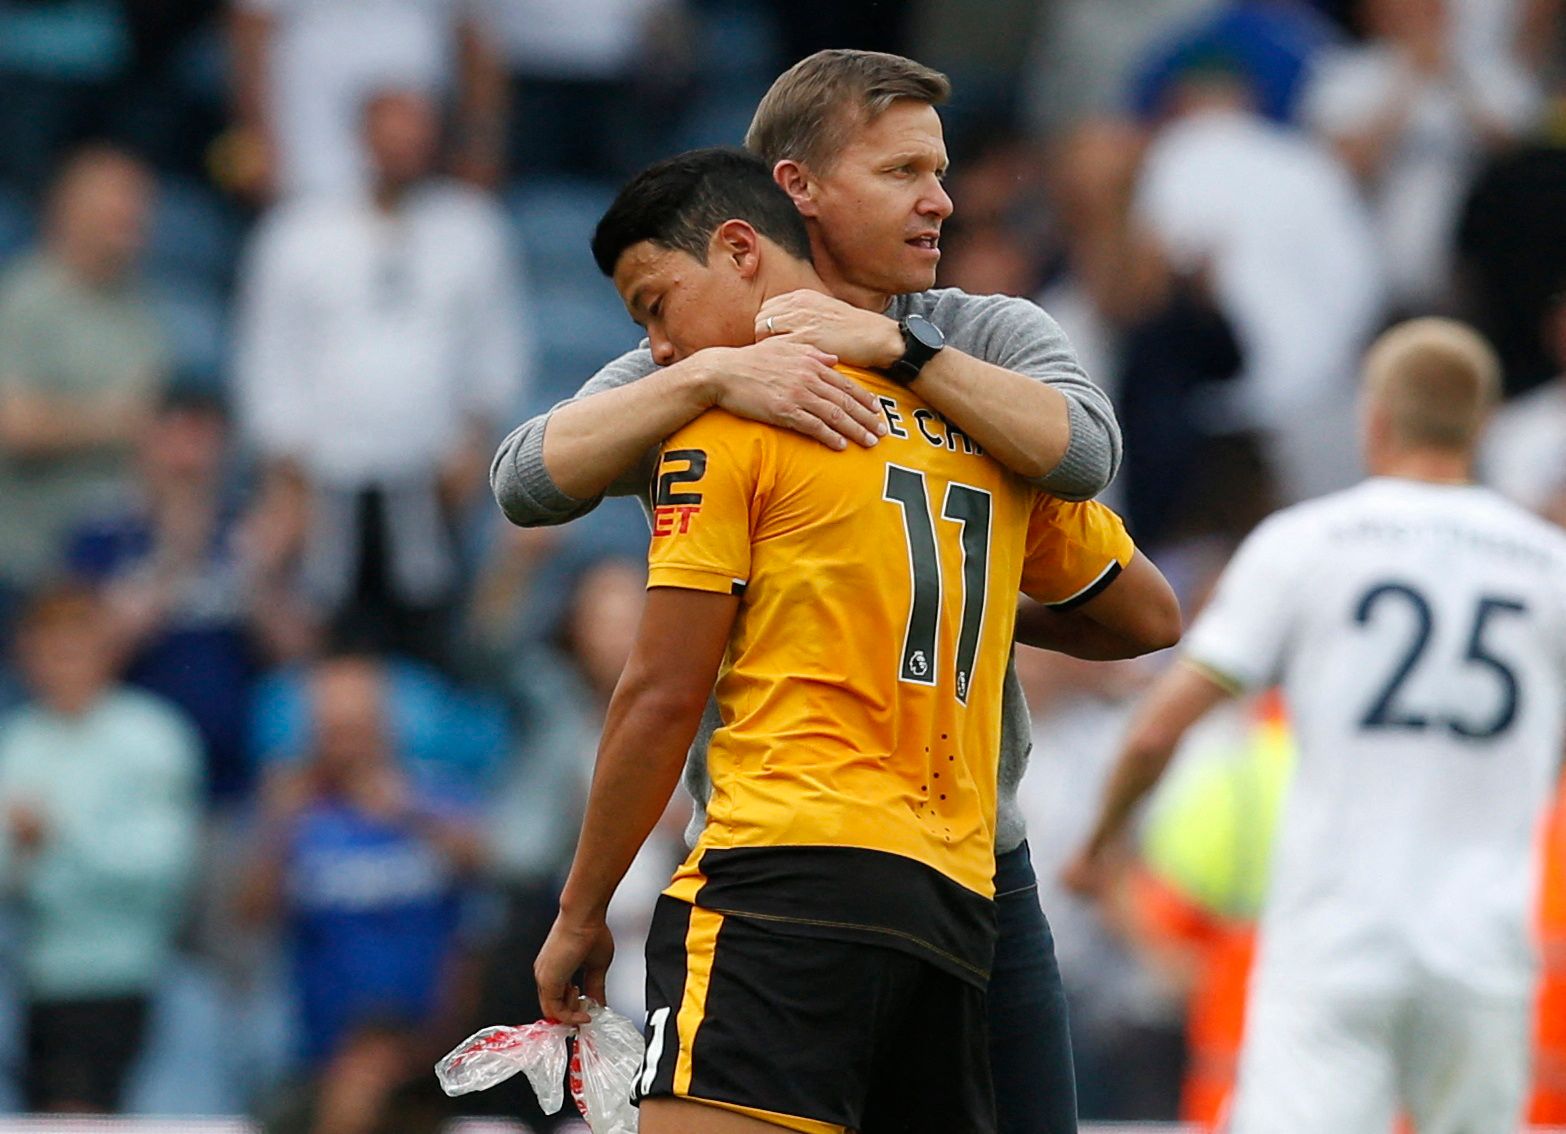 Premier League, Wolves, Hee-Chan Hwang, Wolverhampton Wanderers, Wolves news, Wolves latest, Wolves transfers, Wolves transfer news, WWFC, WWFC news, WWFC transfers, WWFC transfer news, Bruno Lage, Fosun